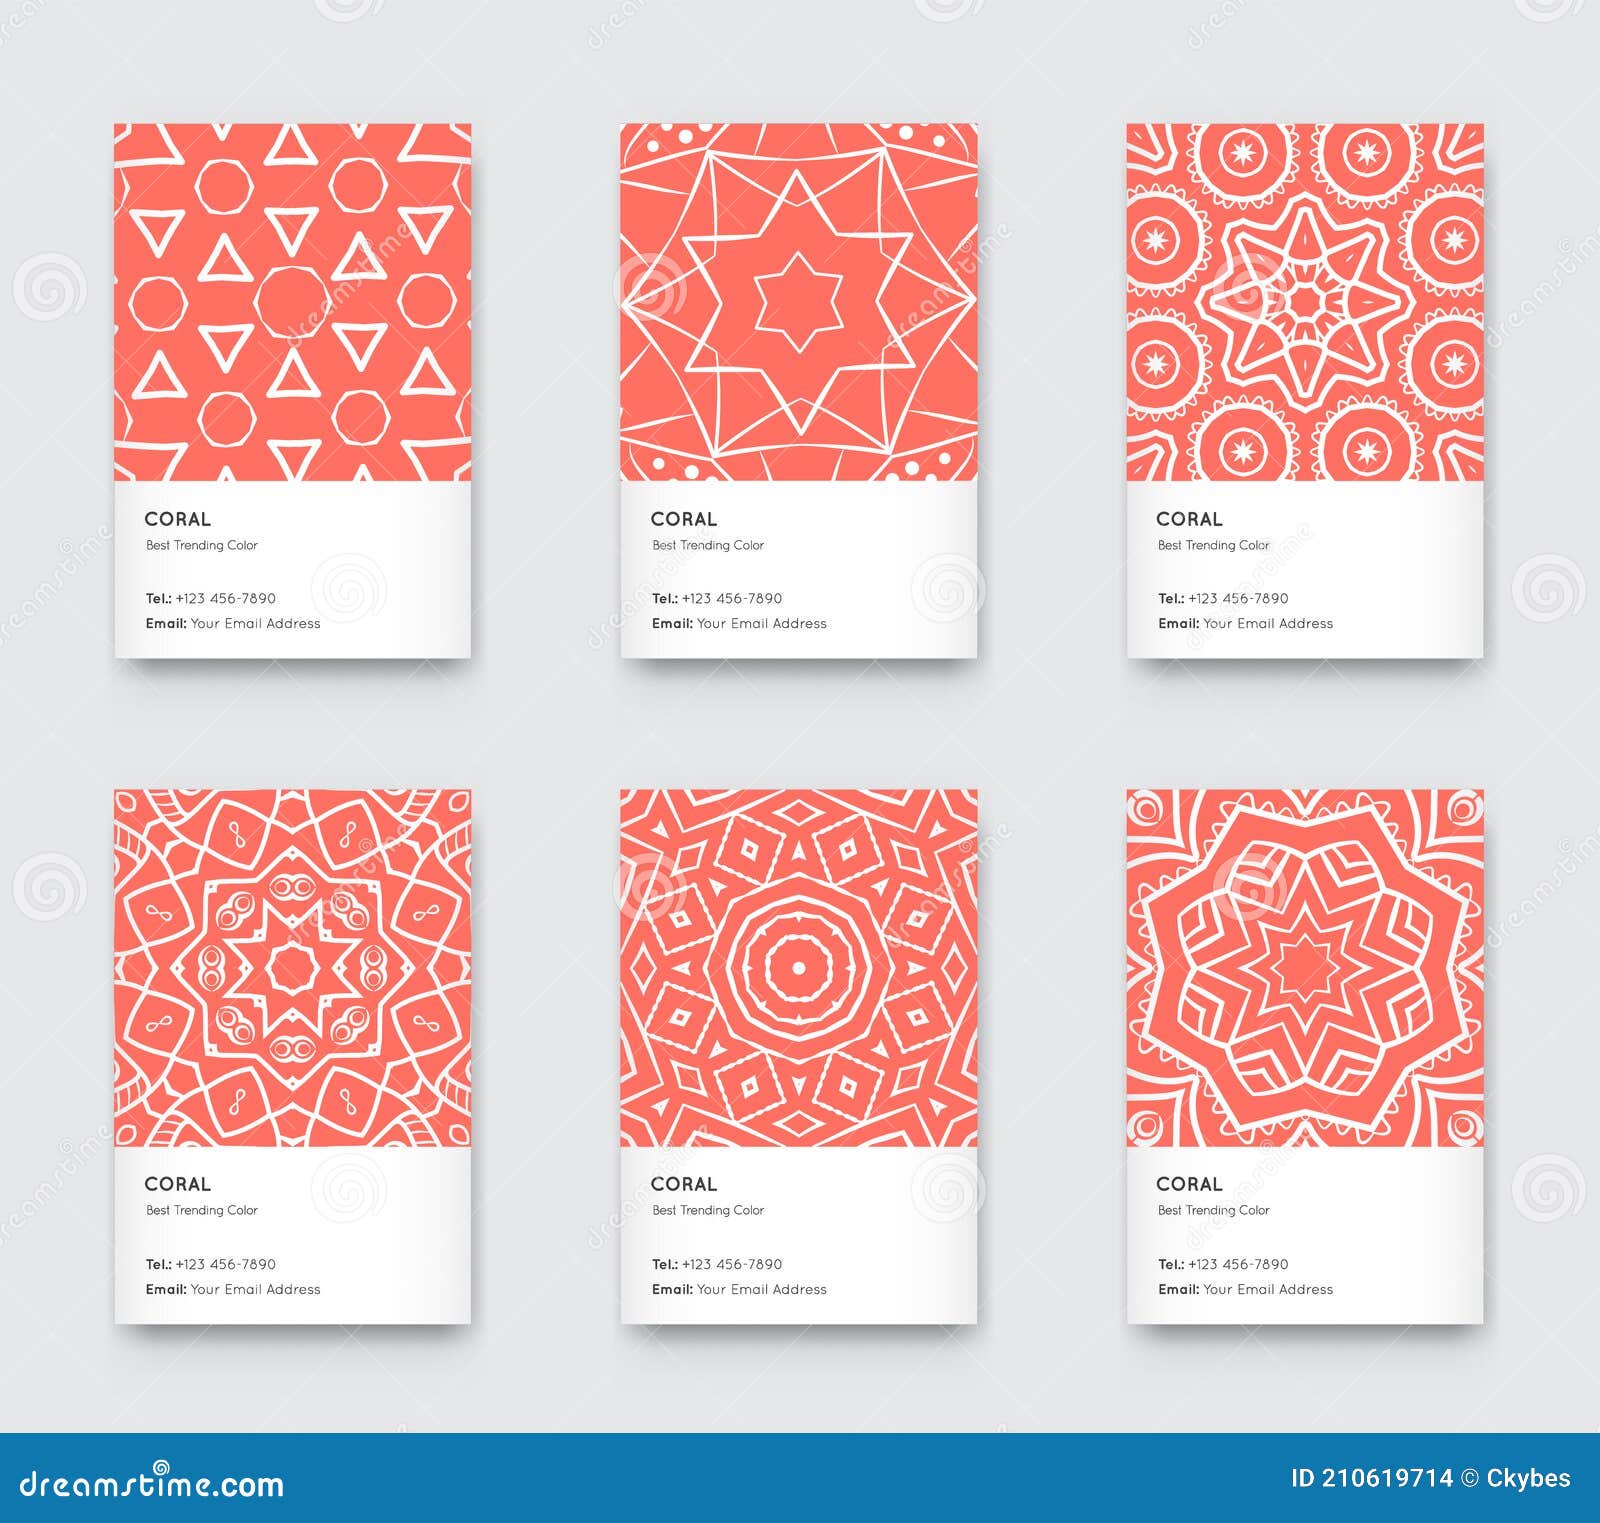 trendy color coral  minimal graphic trendy vertical abstract pattern cards set